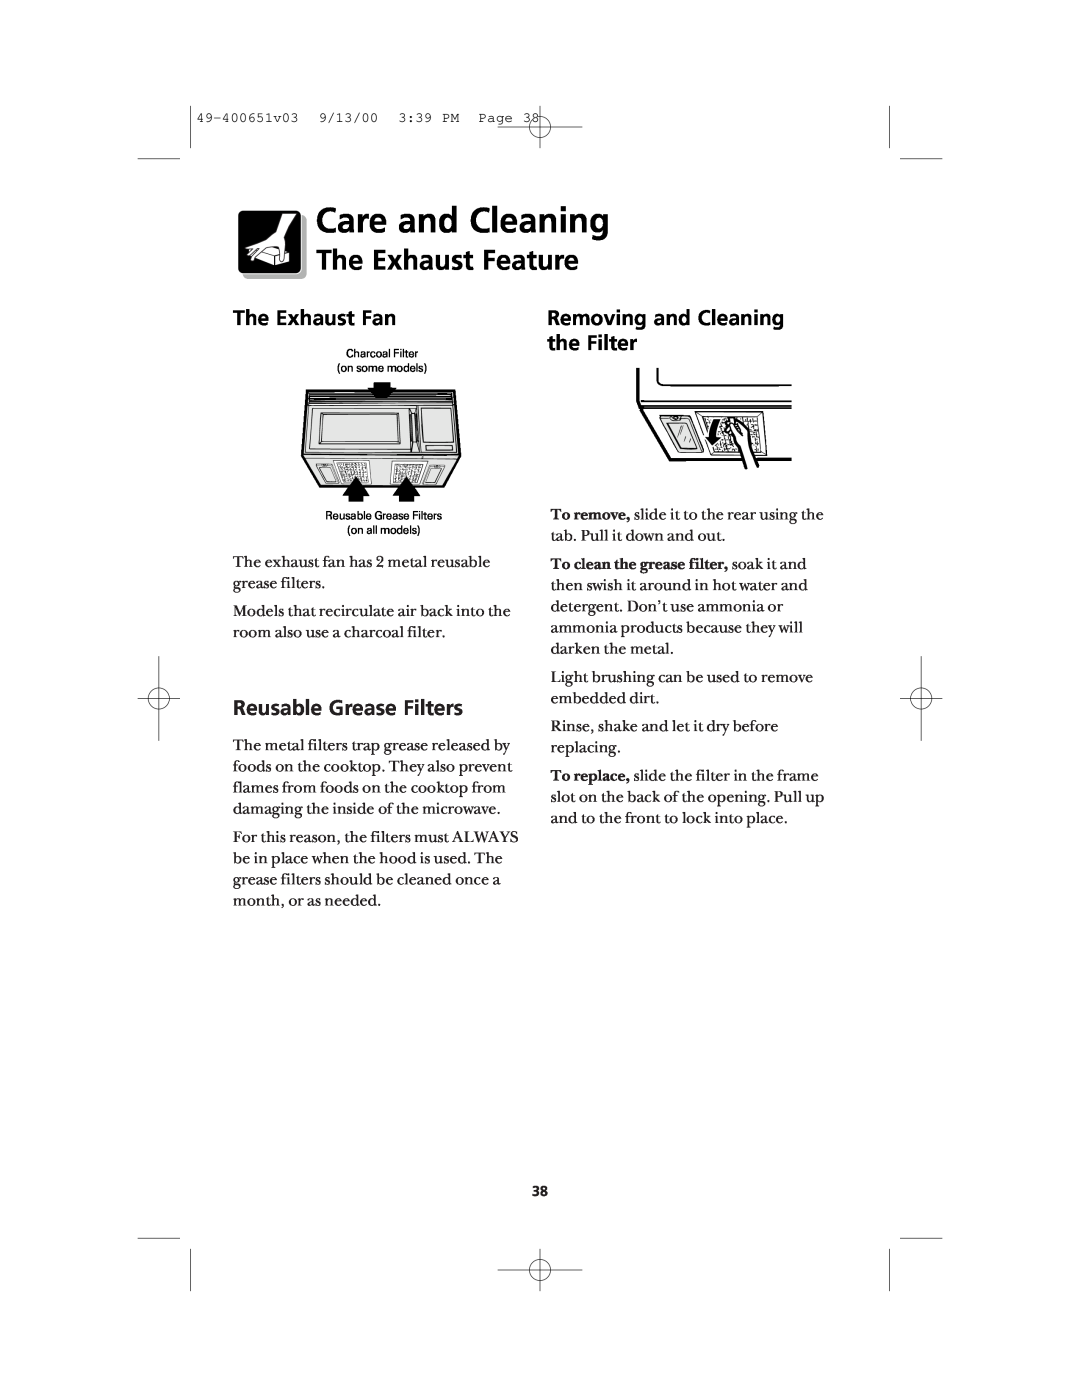 Frigidaire FMT148 warranty The Exhaust Feature, The Exhaust Fan, the Filter, Reusable Grease Filters, Care and Cleaning 